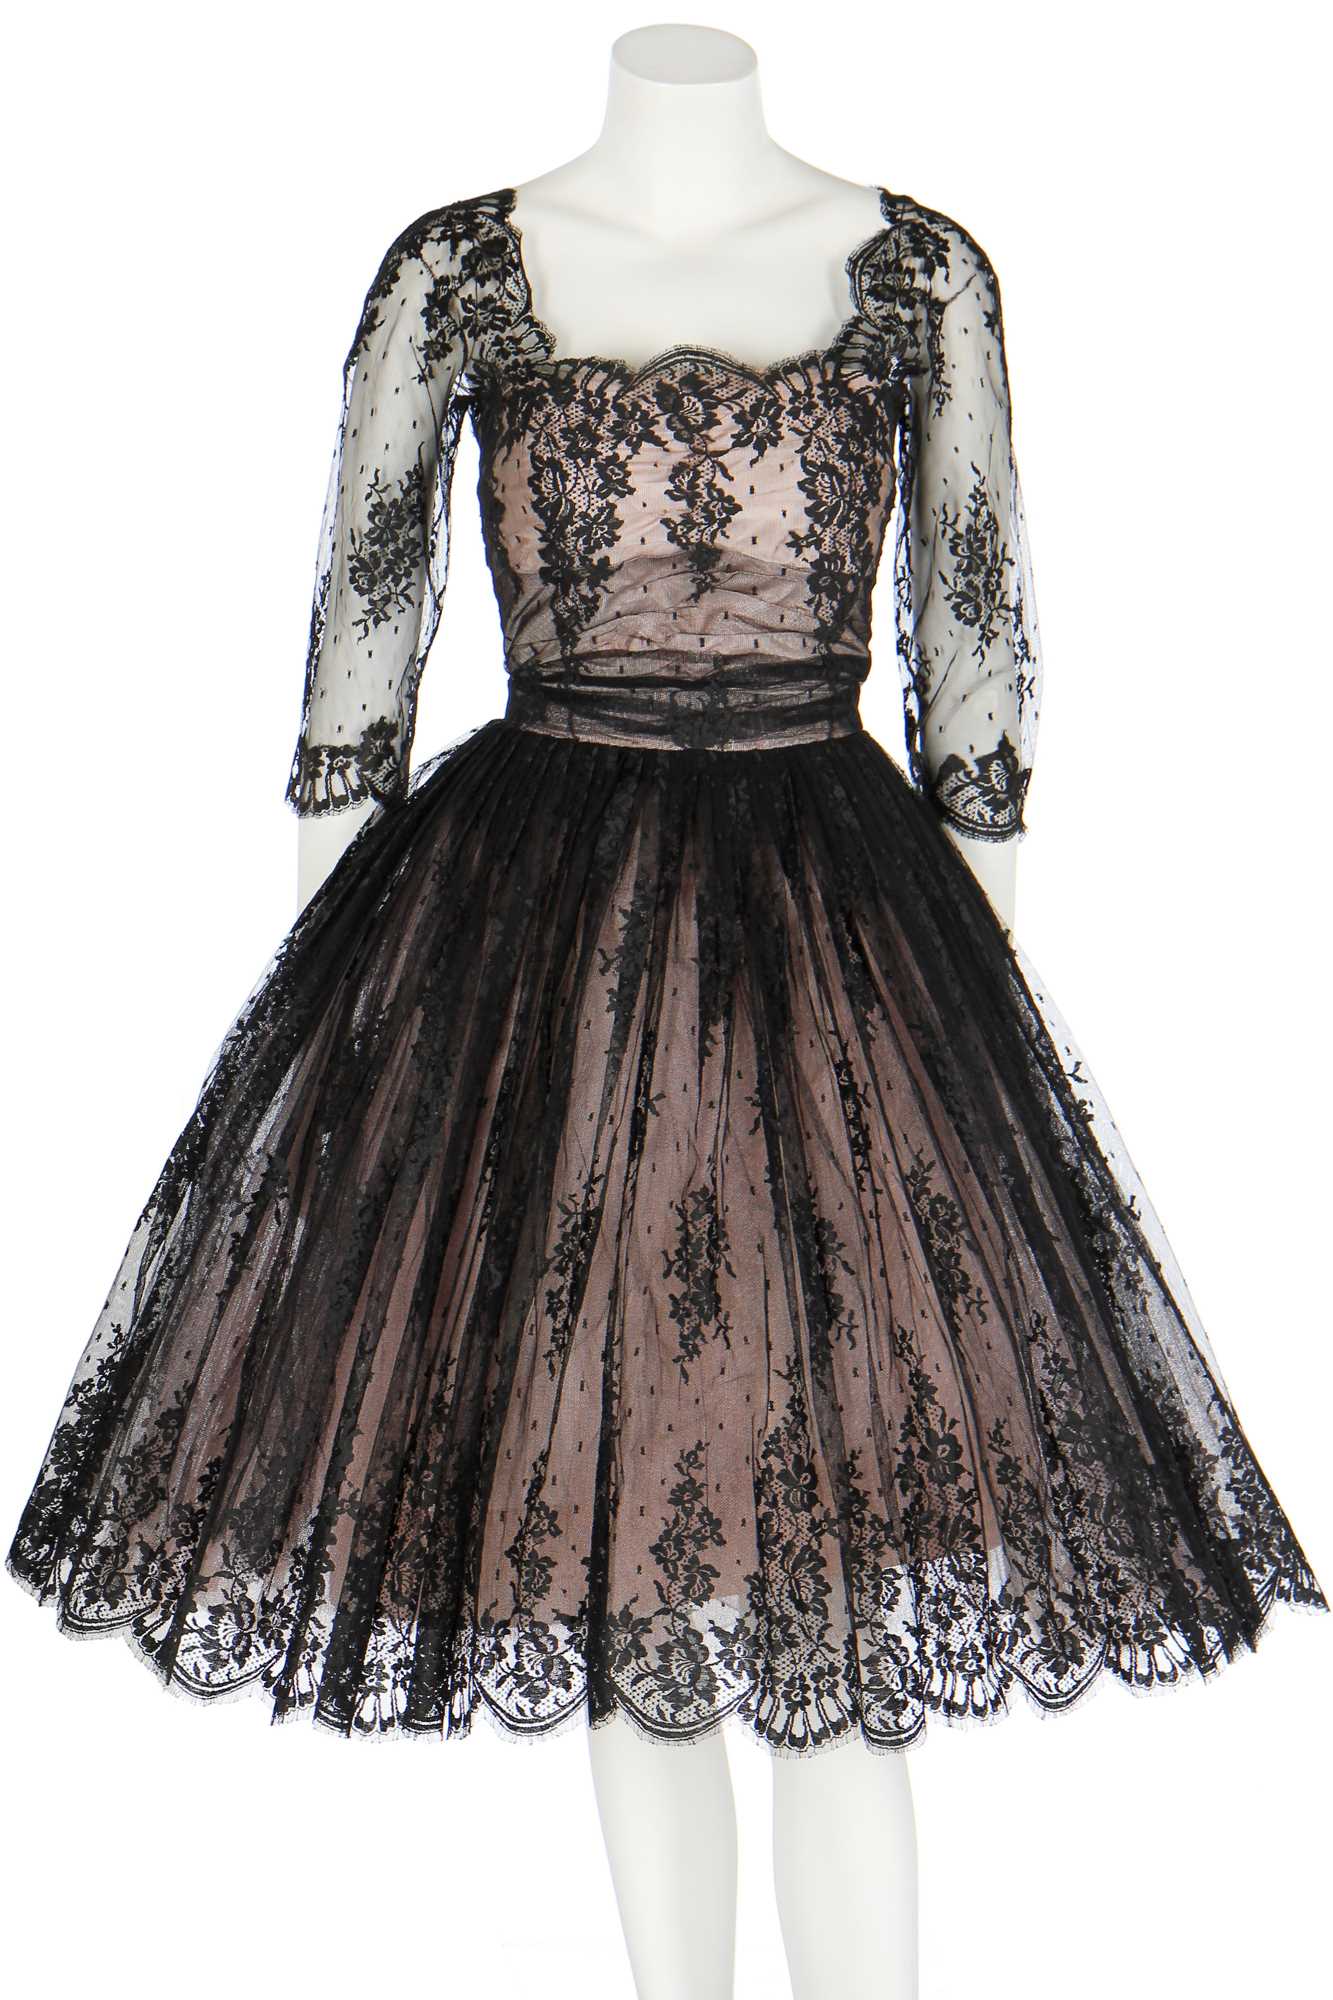 Lot 93 - A Hardy Amies couture 'Chantilly' lace cocktail dress, late 1950s